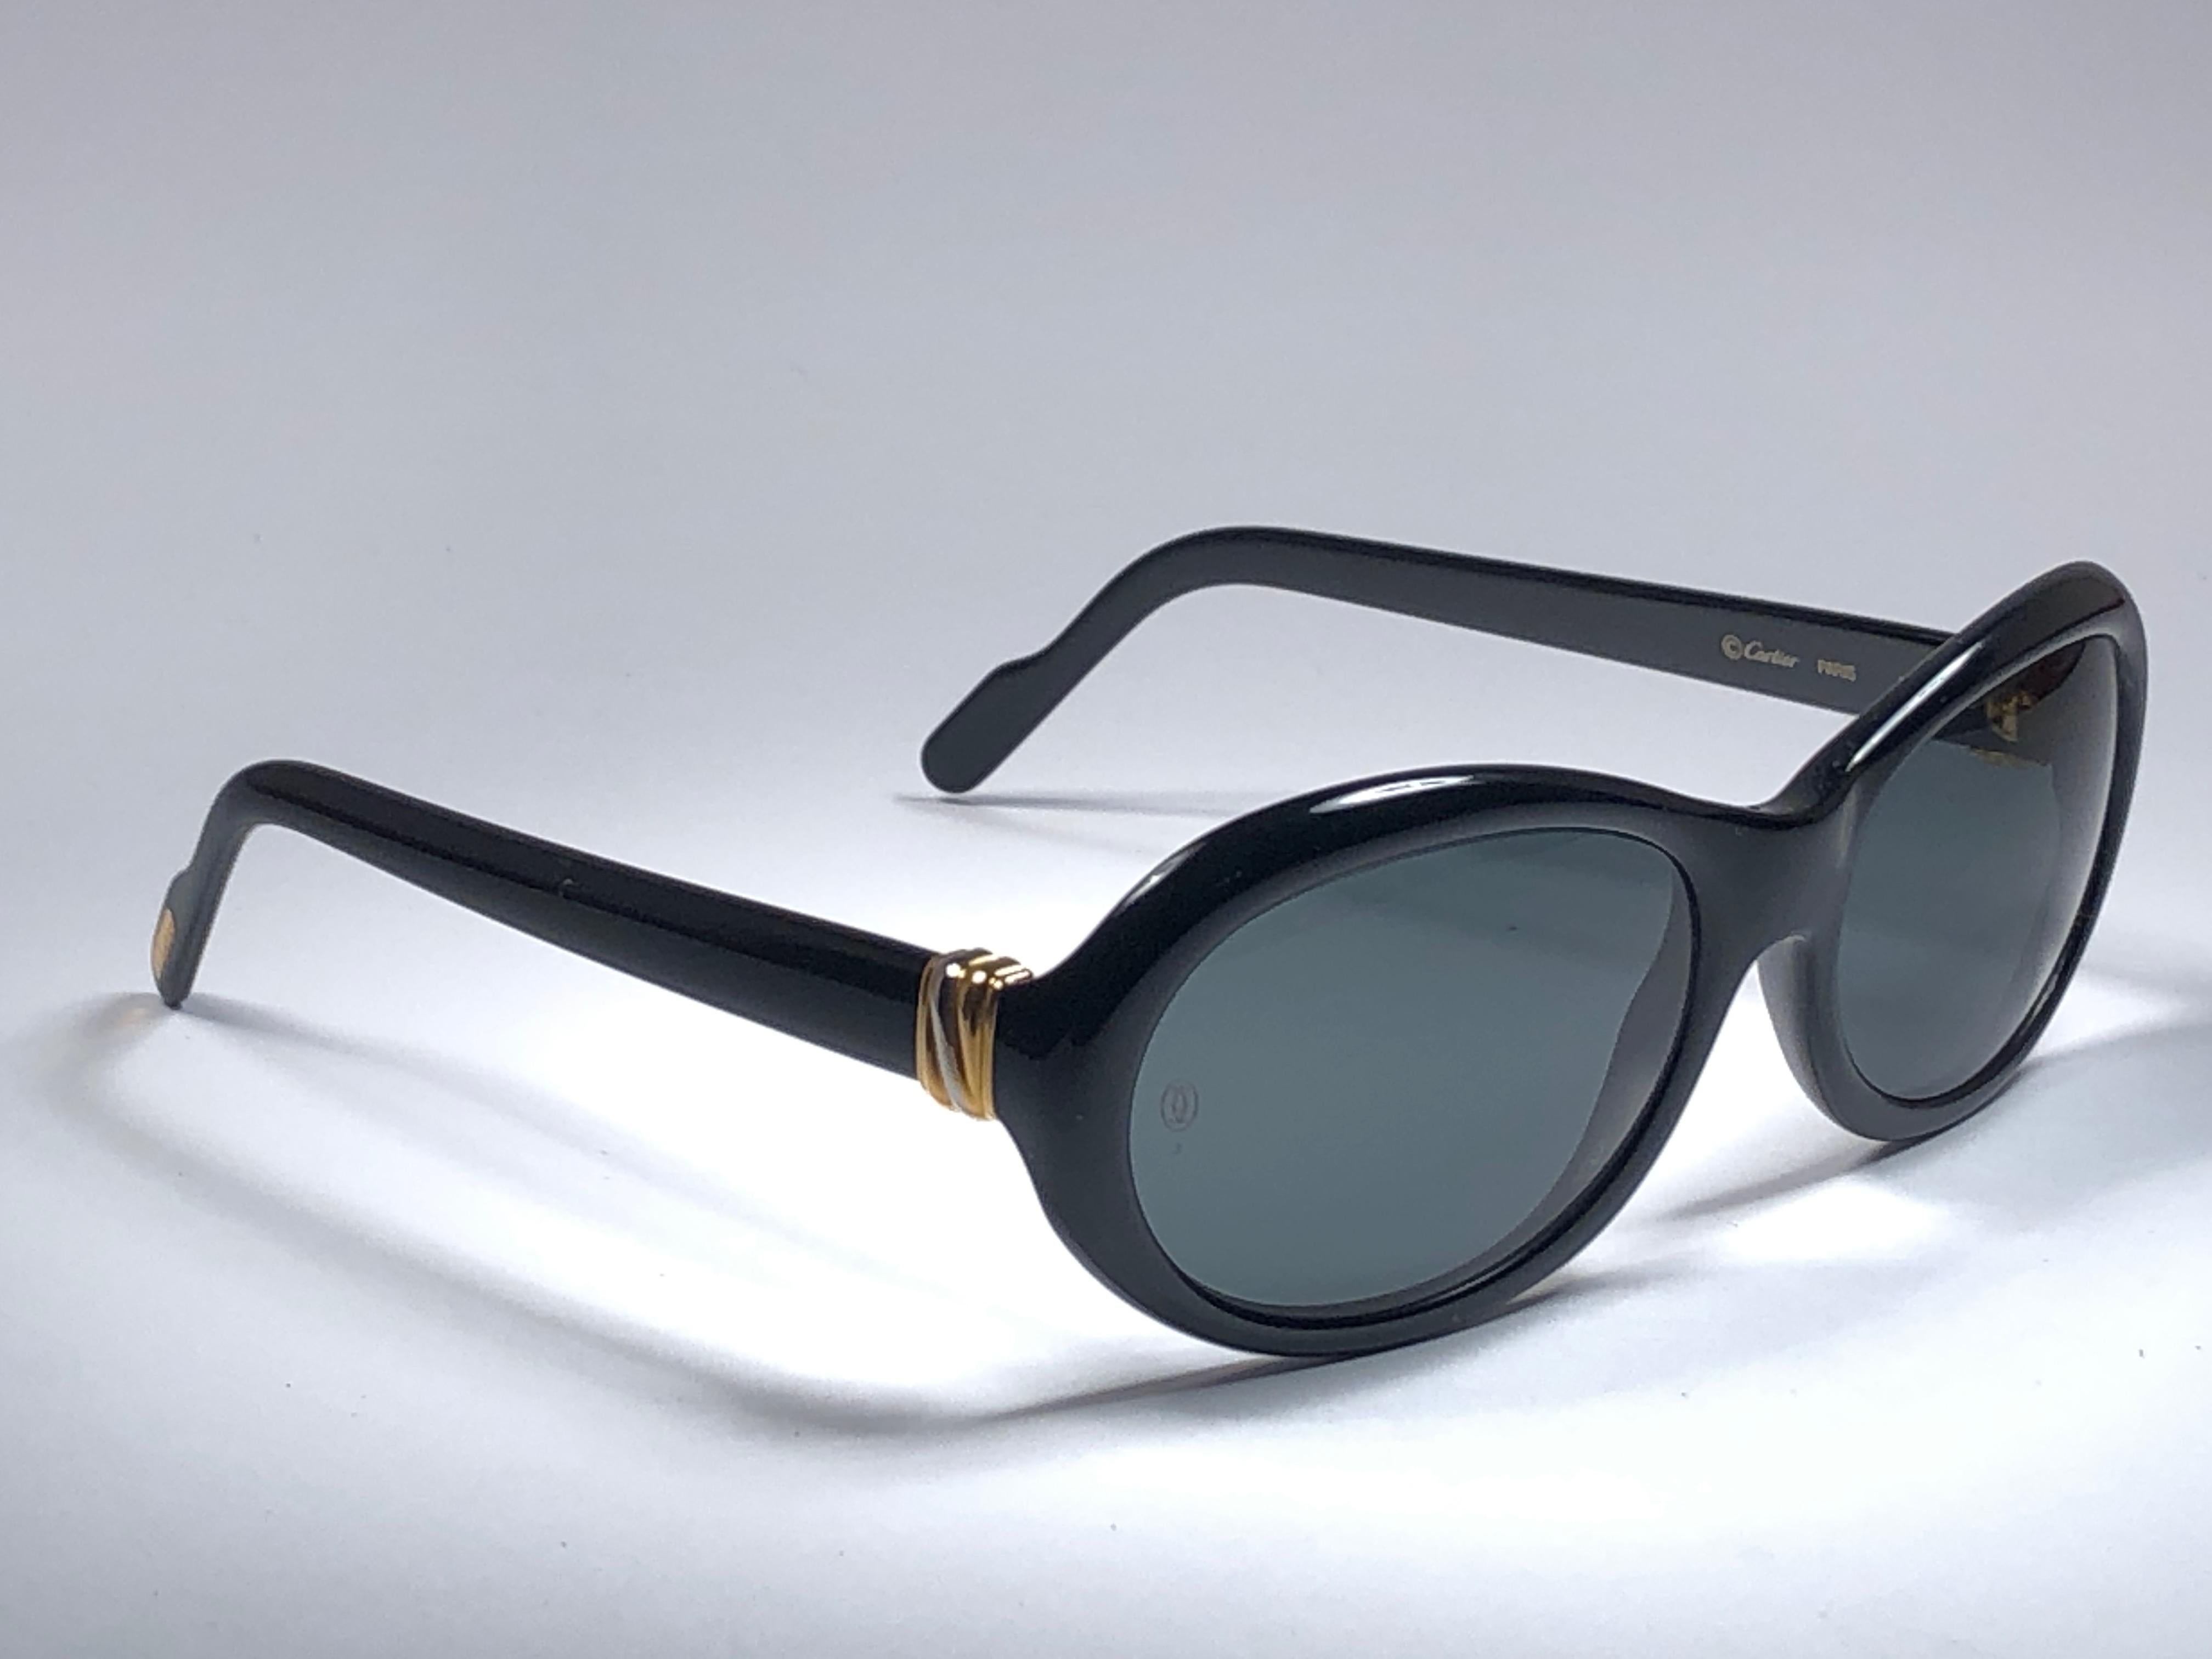 New Cartier in black with grey (uv protection) lenses. 
Frame is black and has the famous real gold and white gold accents. All hallmarks. 
These are like a pair of jewels on your nose with the 18k heavy gold plated accents. 
Beautiful design and a